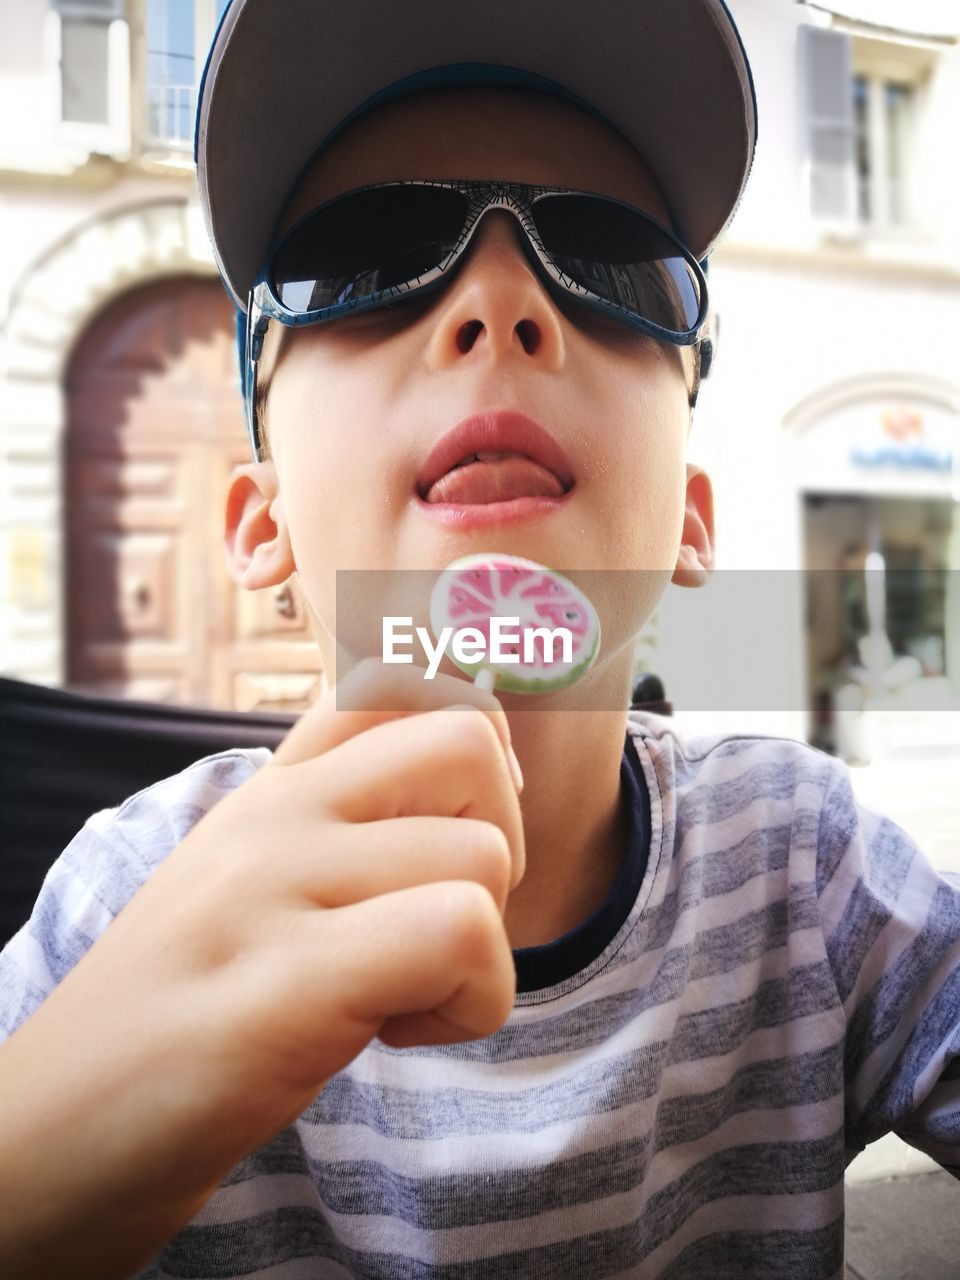 Low angle view of boy eating lollypop against building